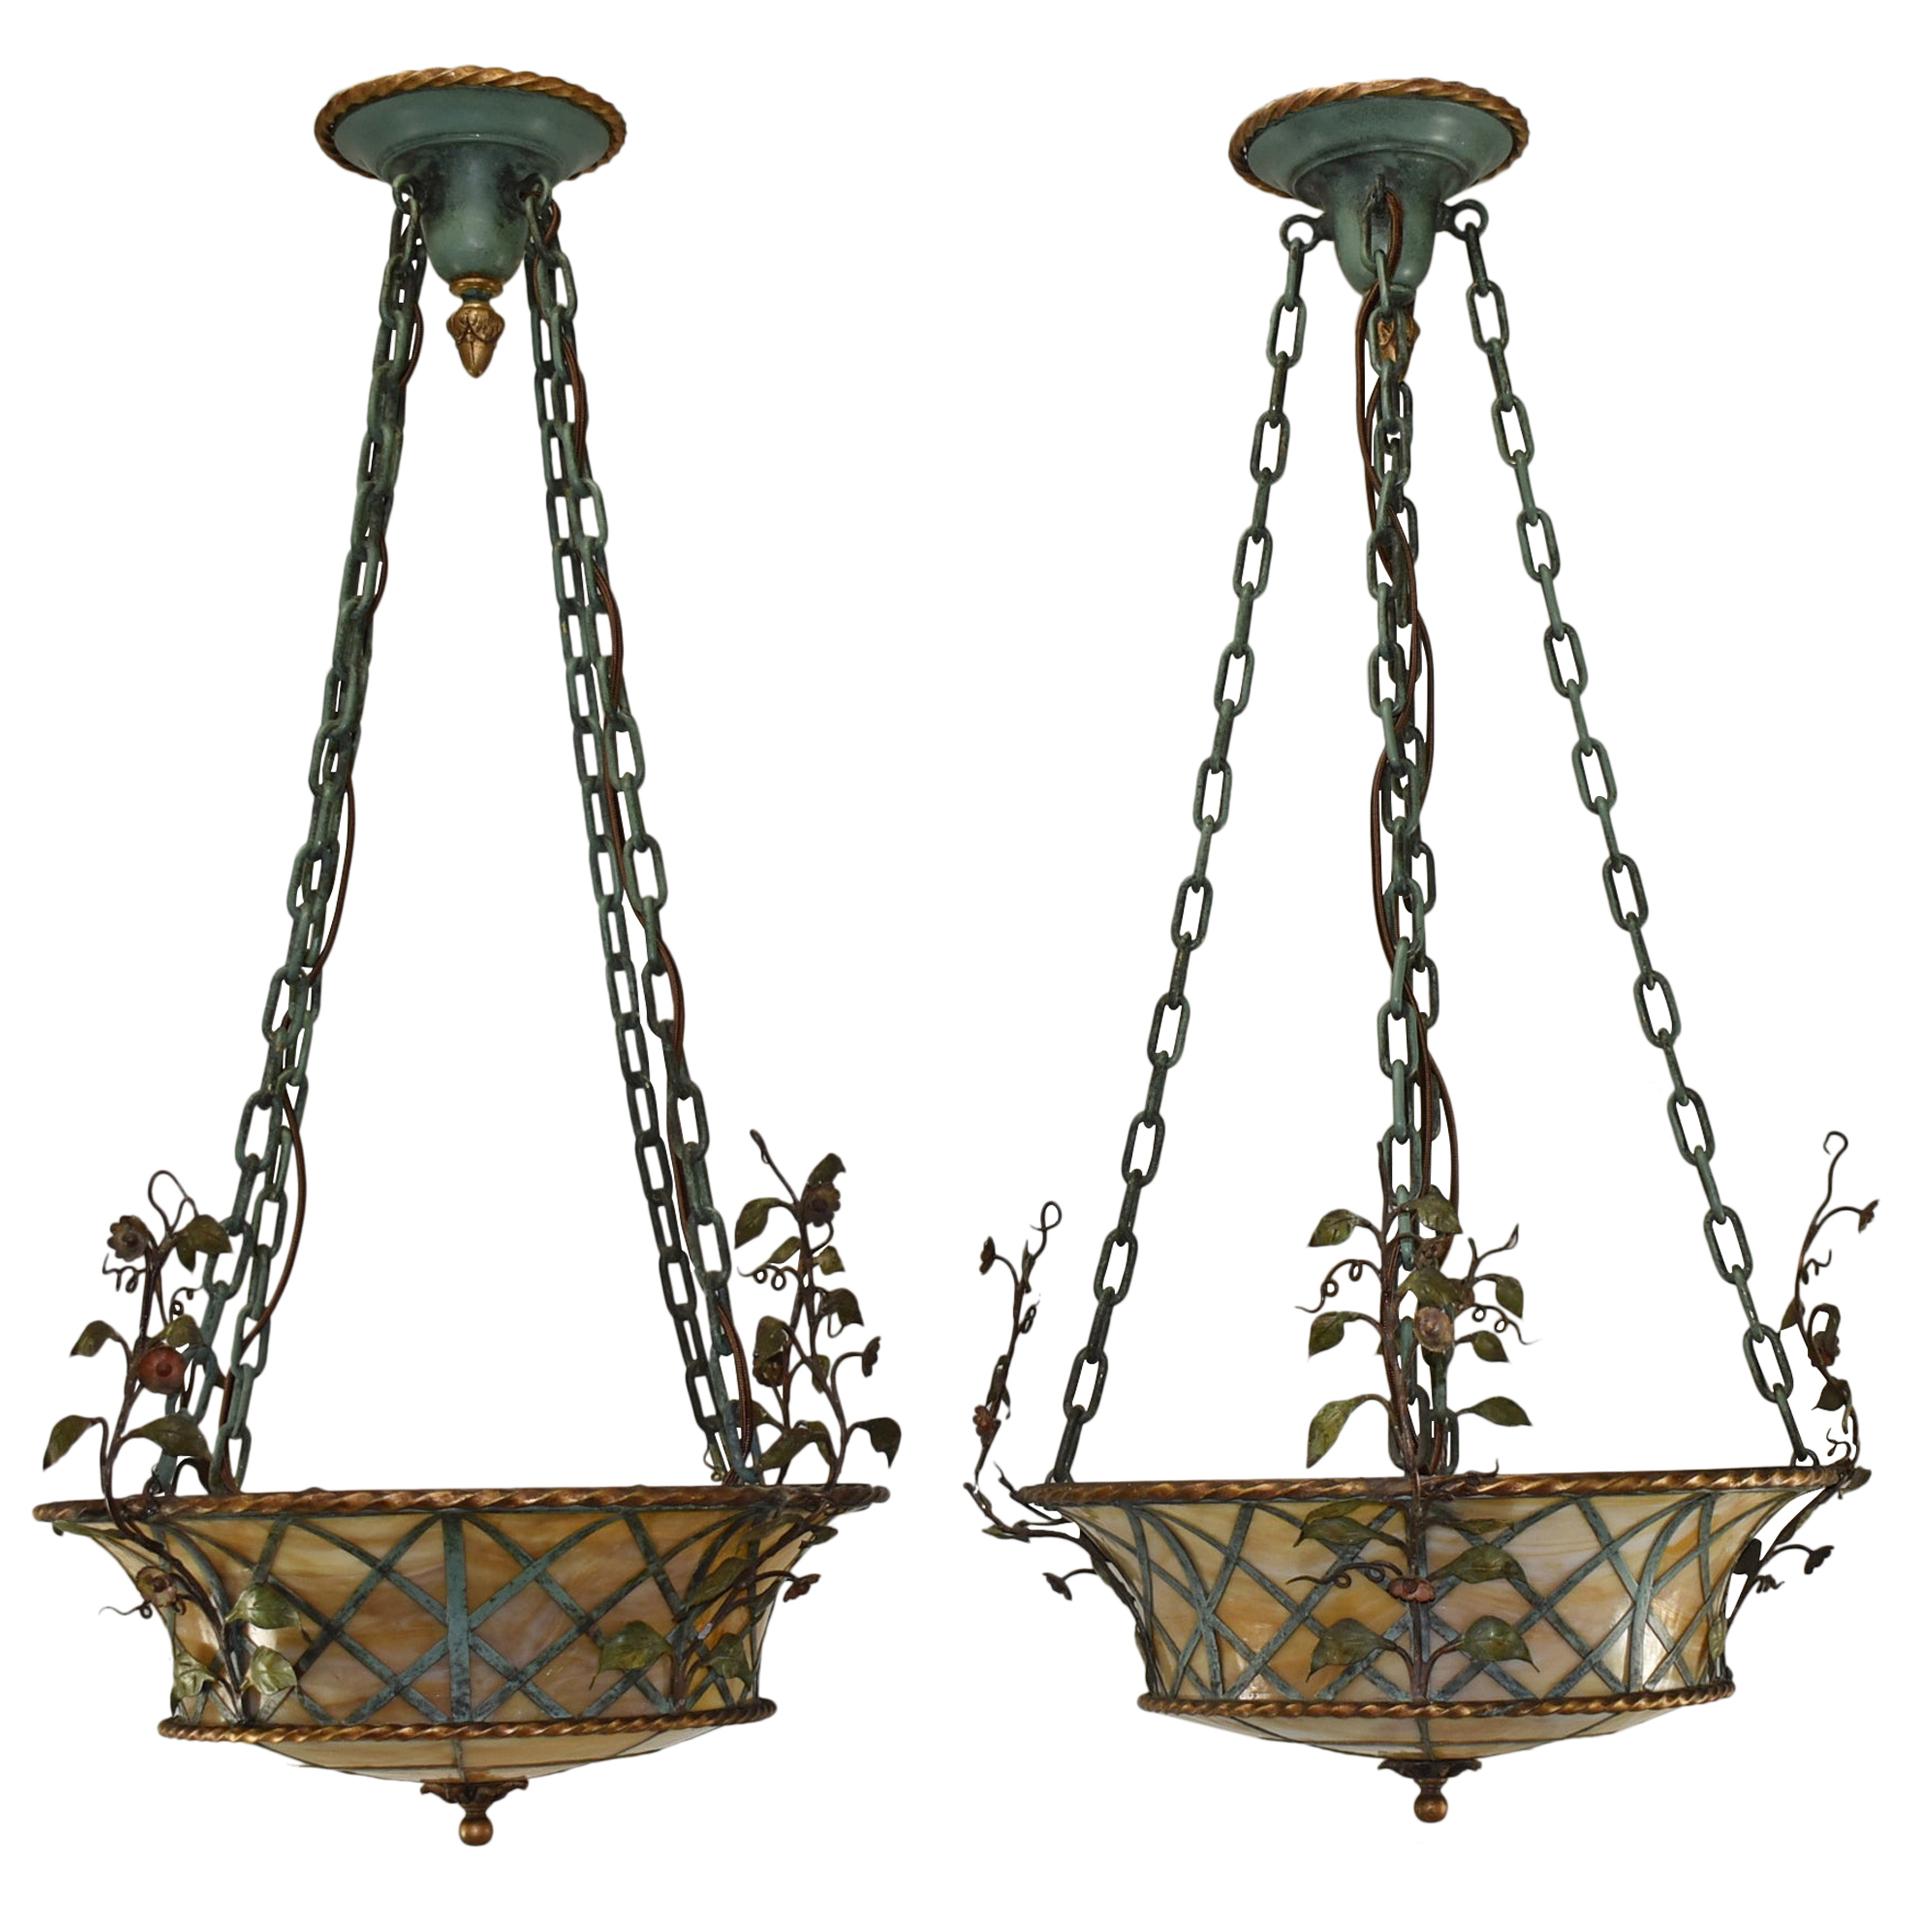 Pair of Slag Glass 1920s Basket Form Brass and Iron Chandeliers Leaves and Vines